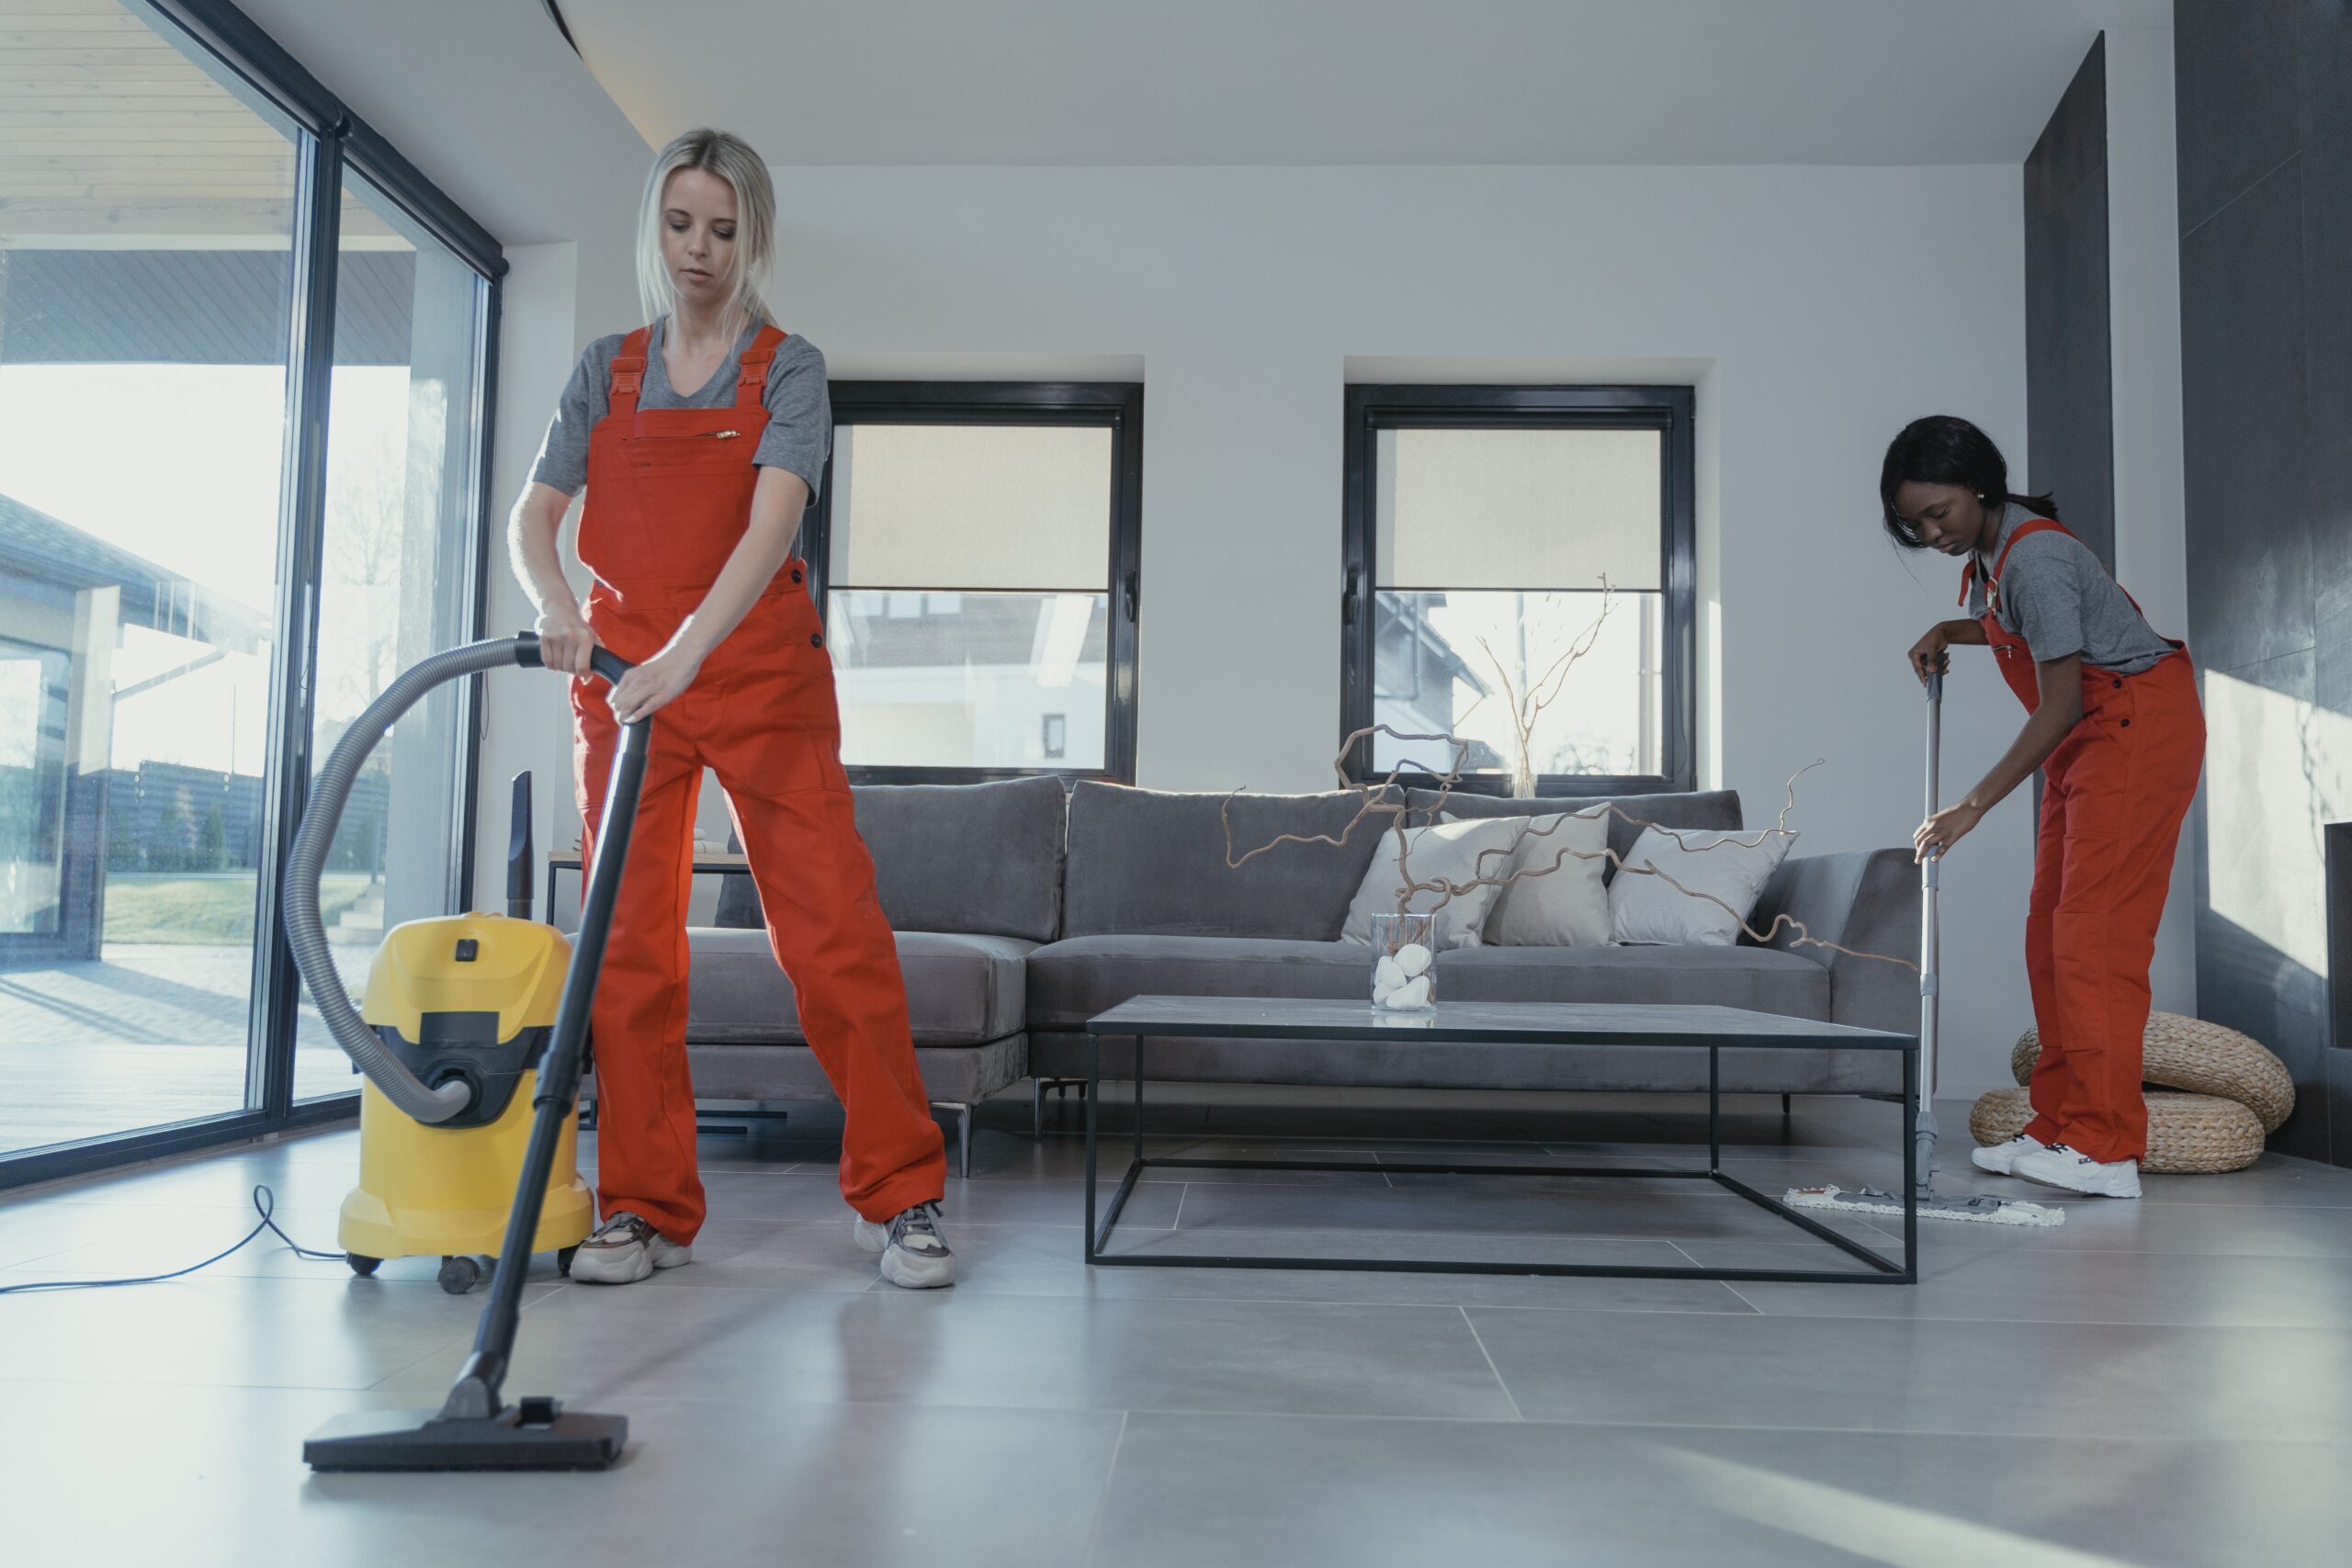 Budgeting to get a Professional home cleaning service